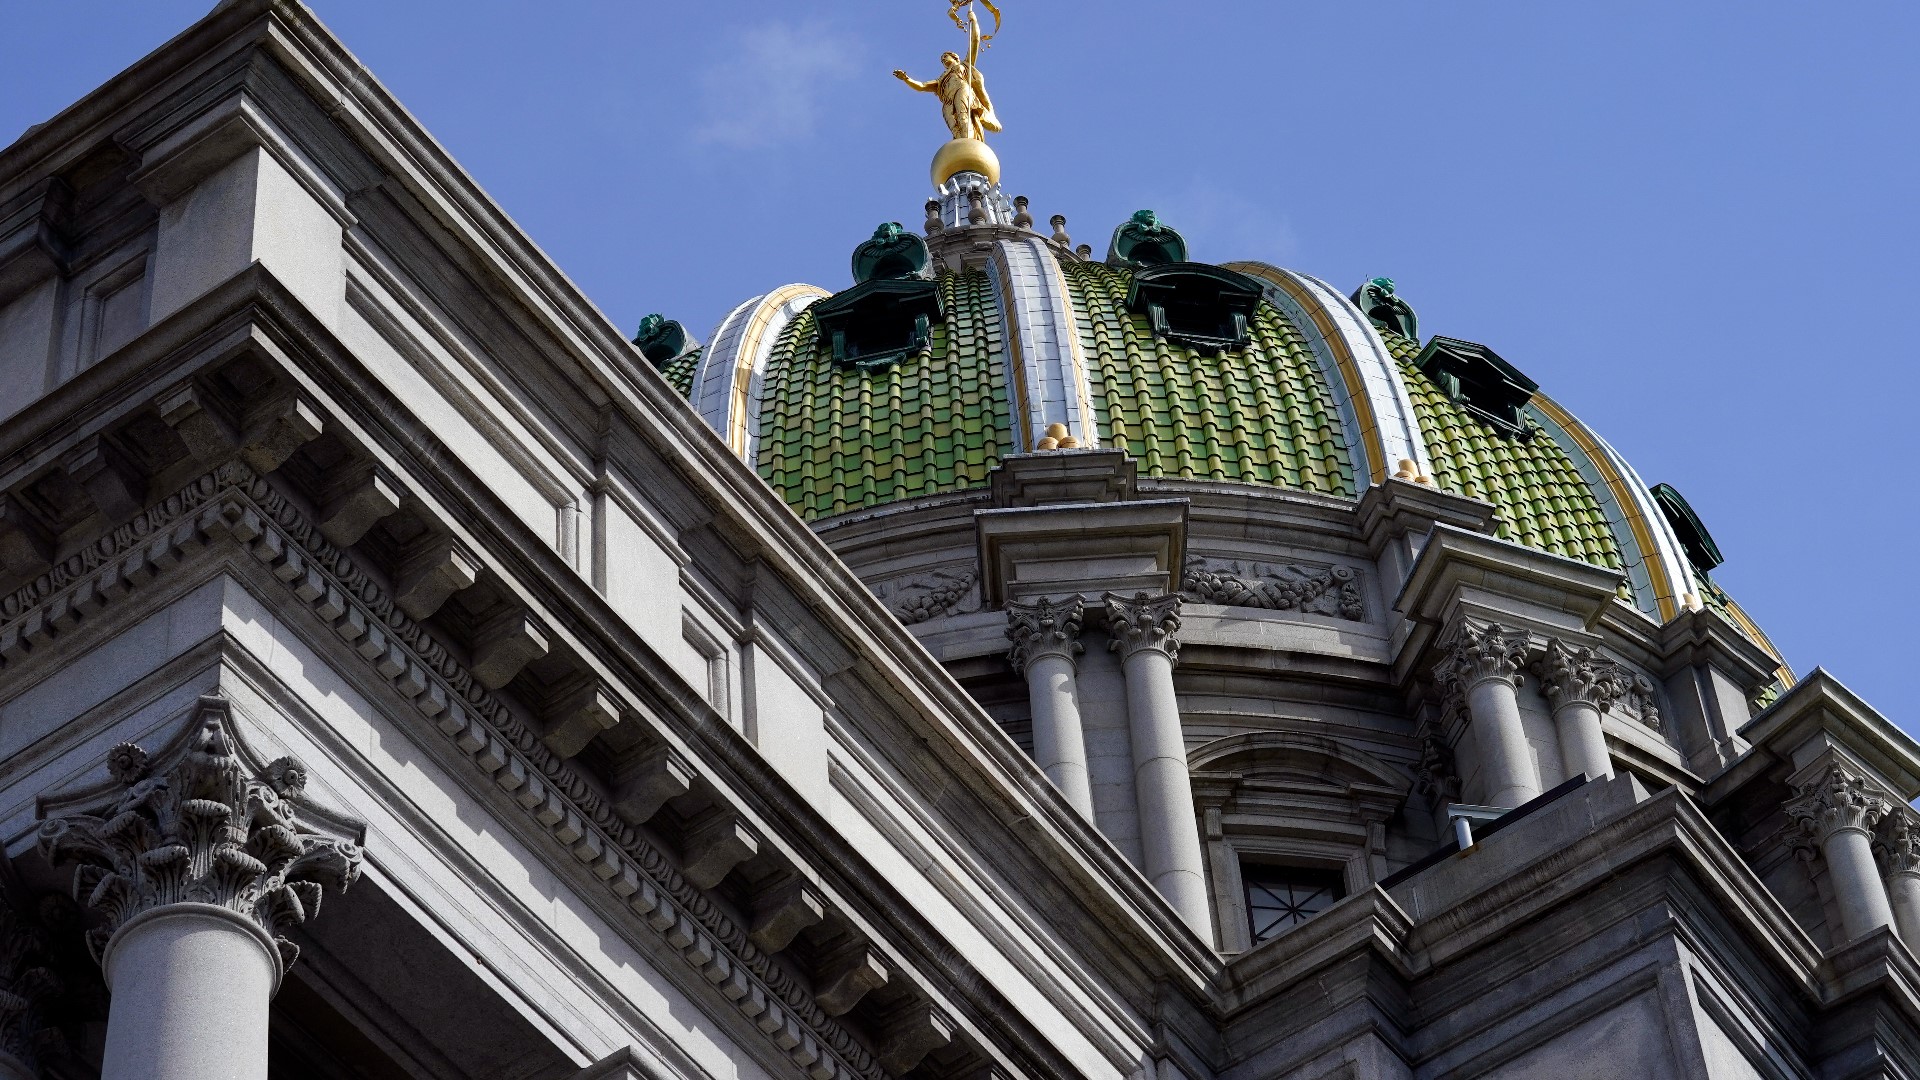 Pennsylvania’s Capitol saw a flurry of legislation over the weekend, including the passage of a budget.